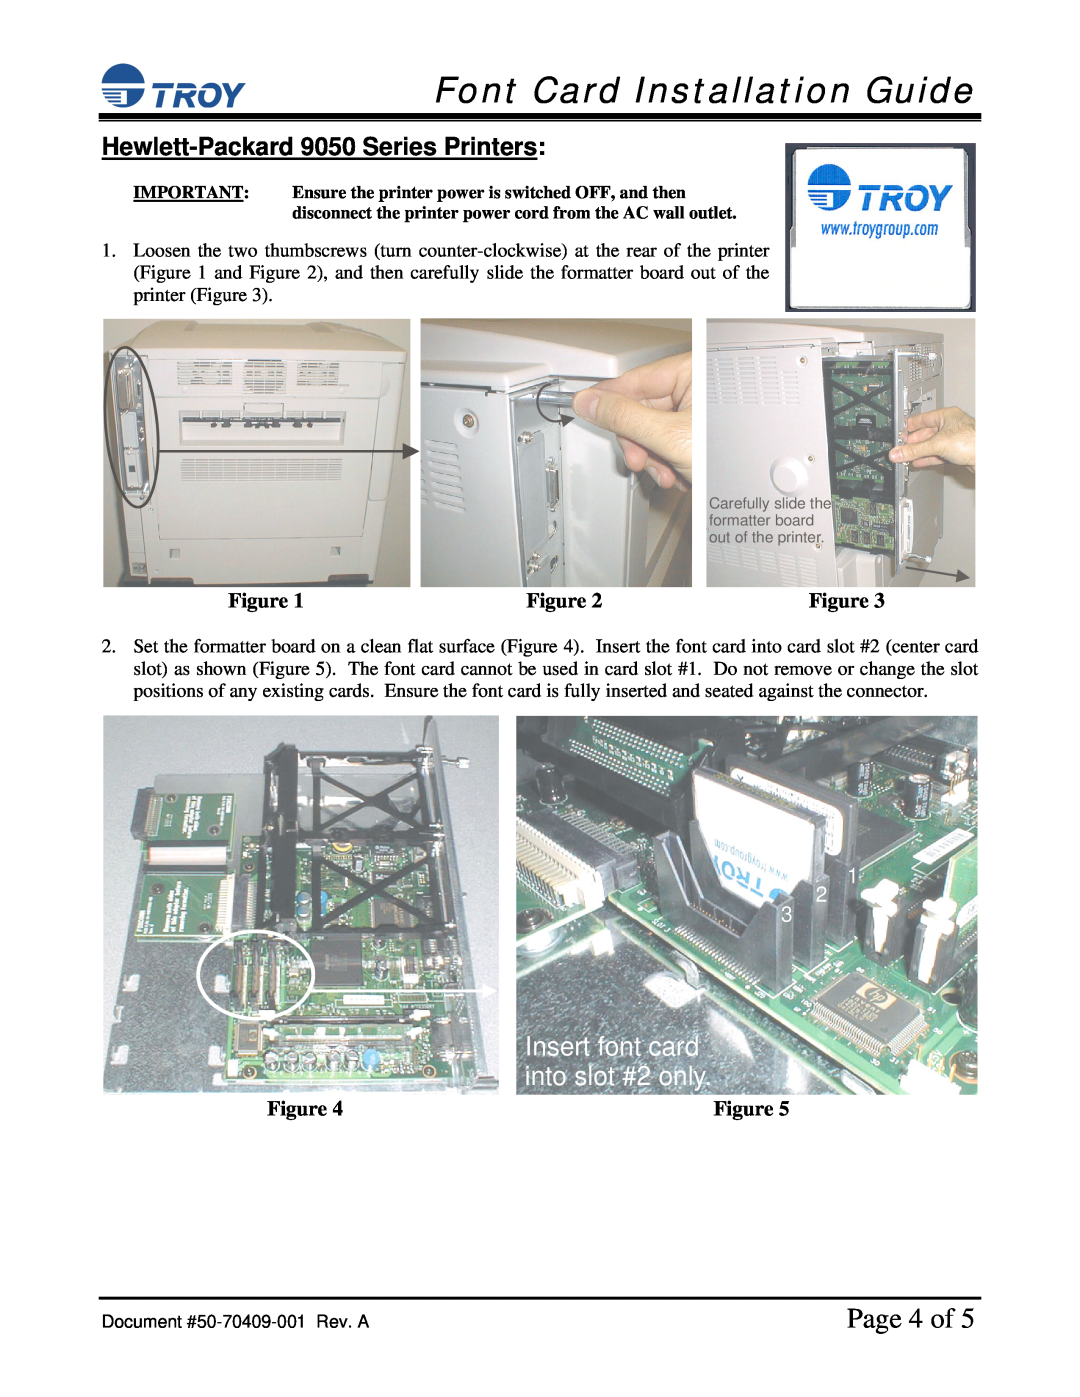 TROY Group HP 4250 / 4350 Page 4 of, Hewlett-Packard 9050 Series Printers, Font Card Installation Guide, Insert font card 